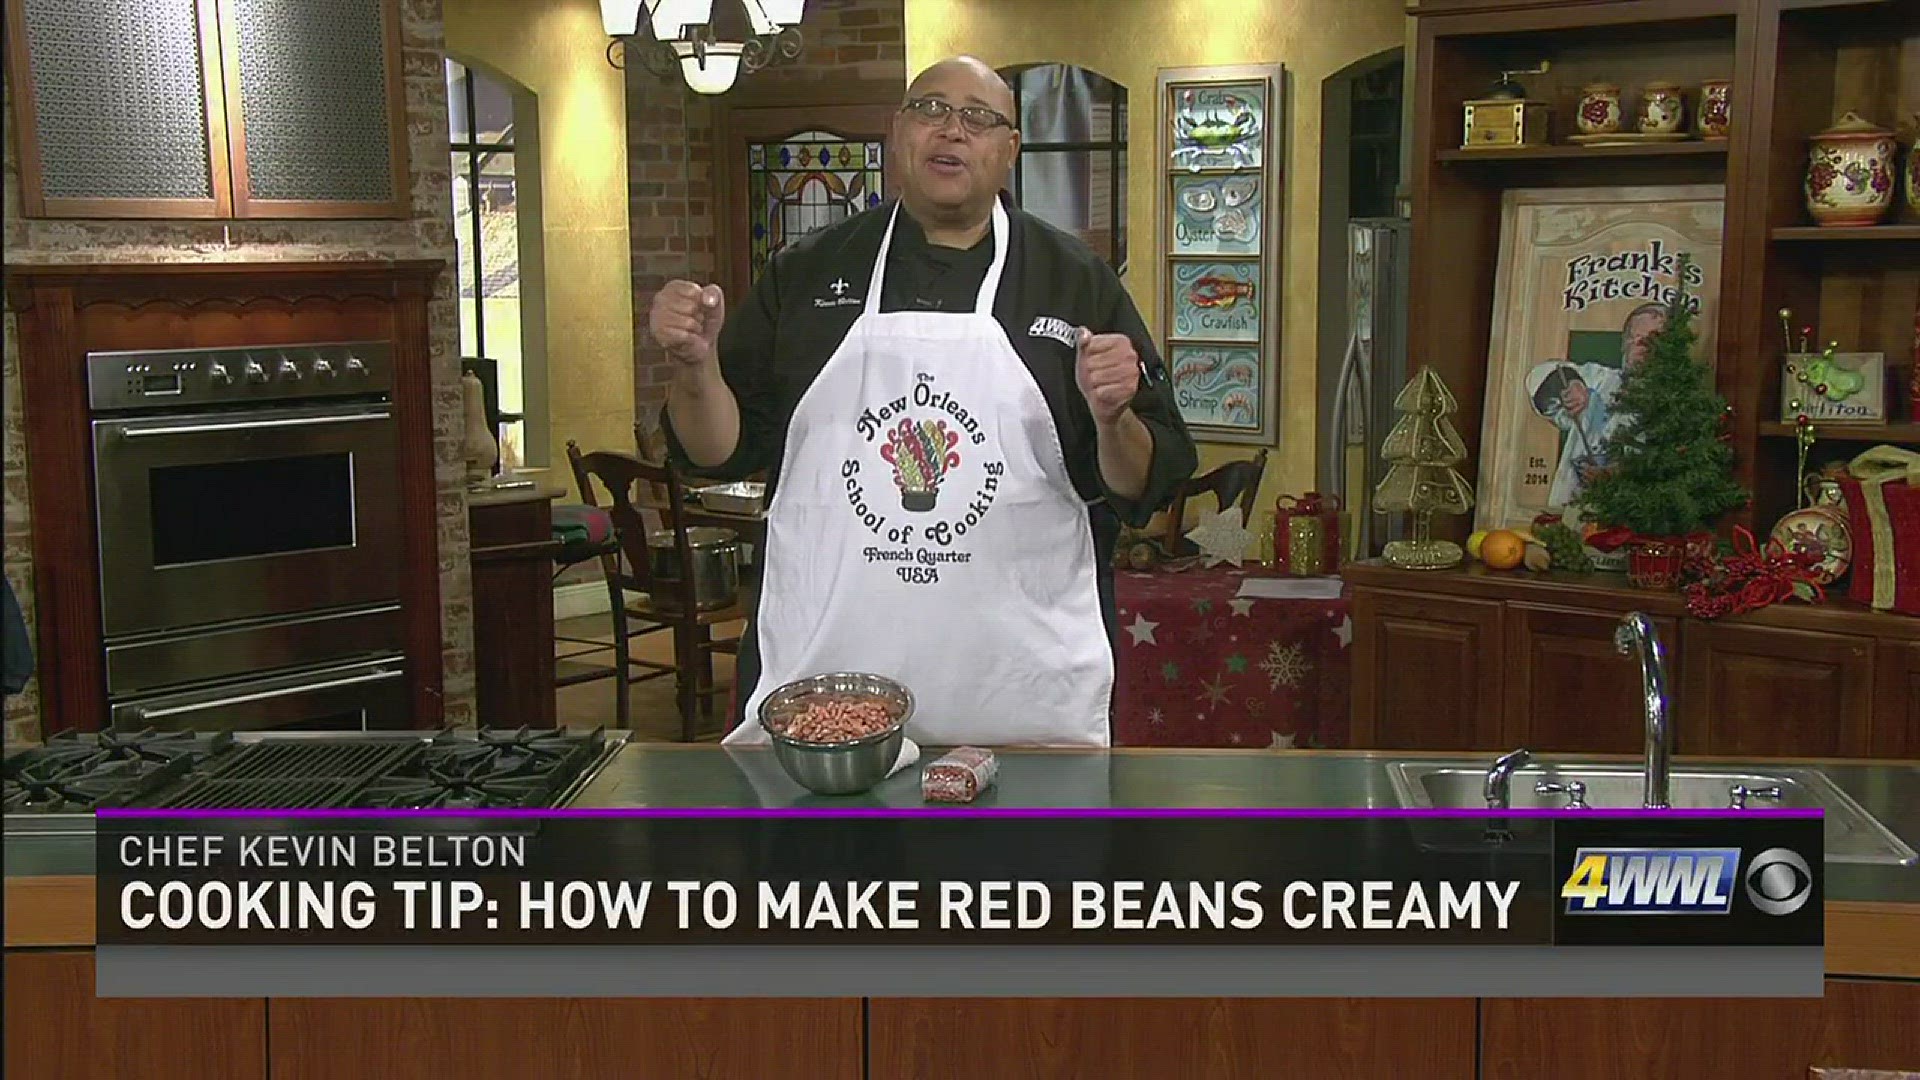 Chef Kevin Belton offers some tips on how to make your red beans come out creamy.